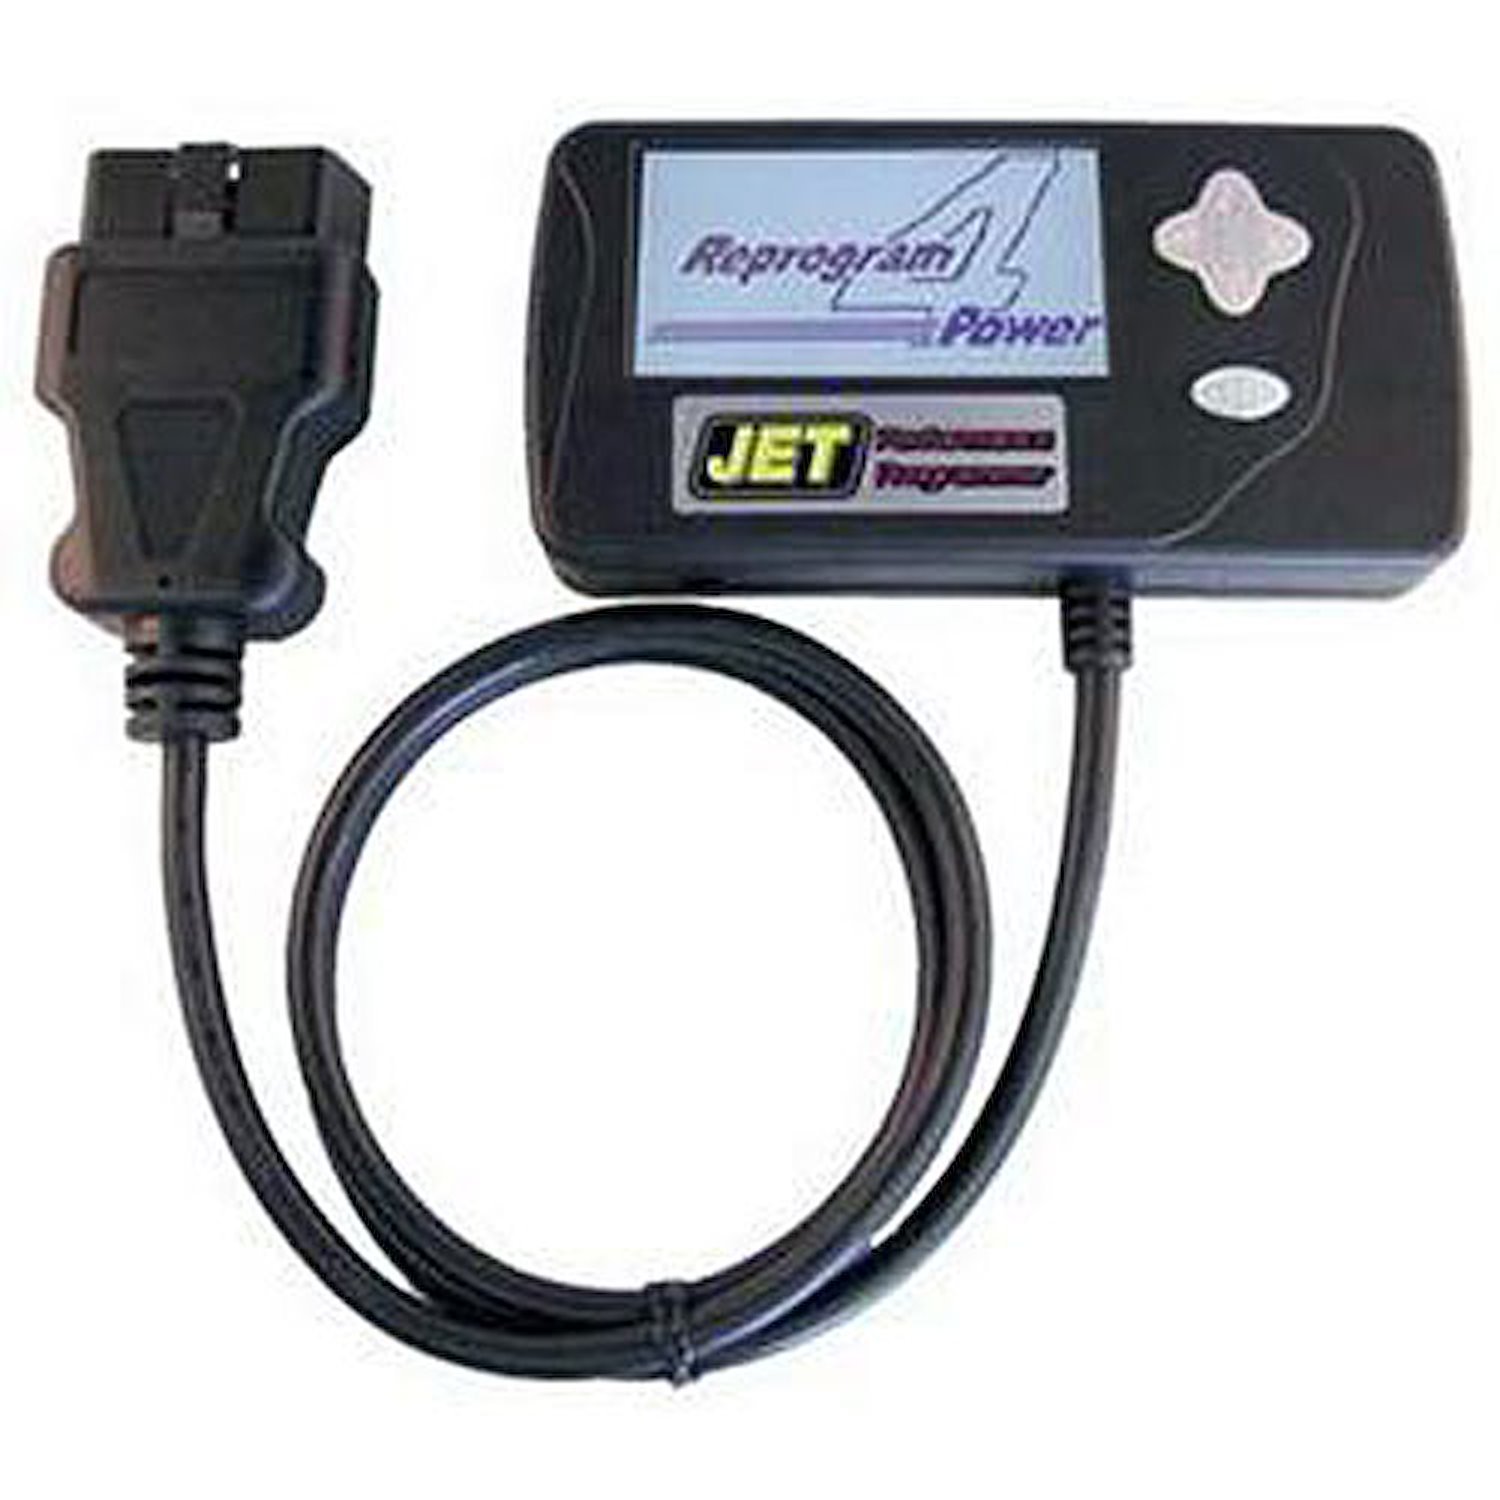 Ford Performance Programmer 2004-14 Ford Car/Truck/SUV Automatic/Manual